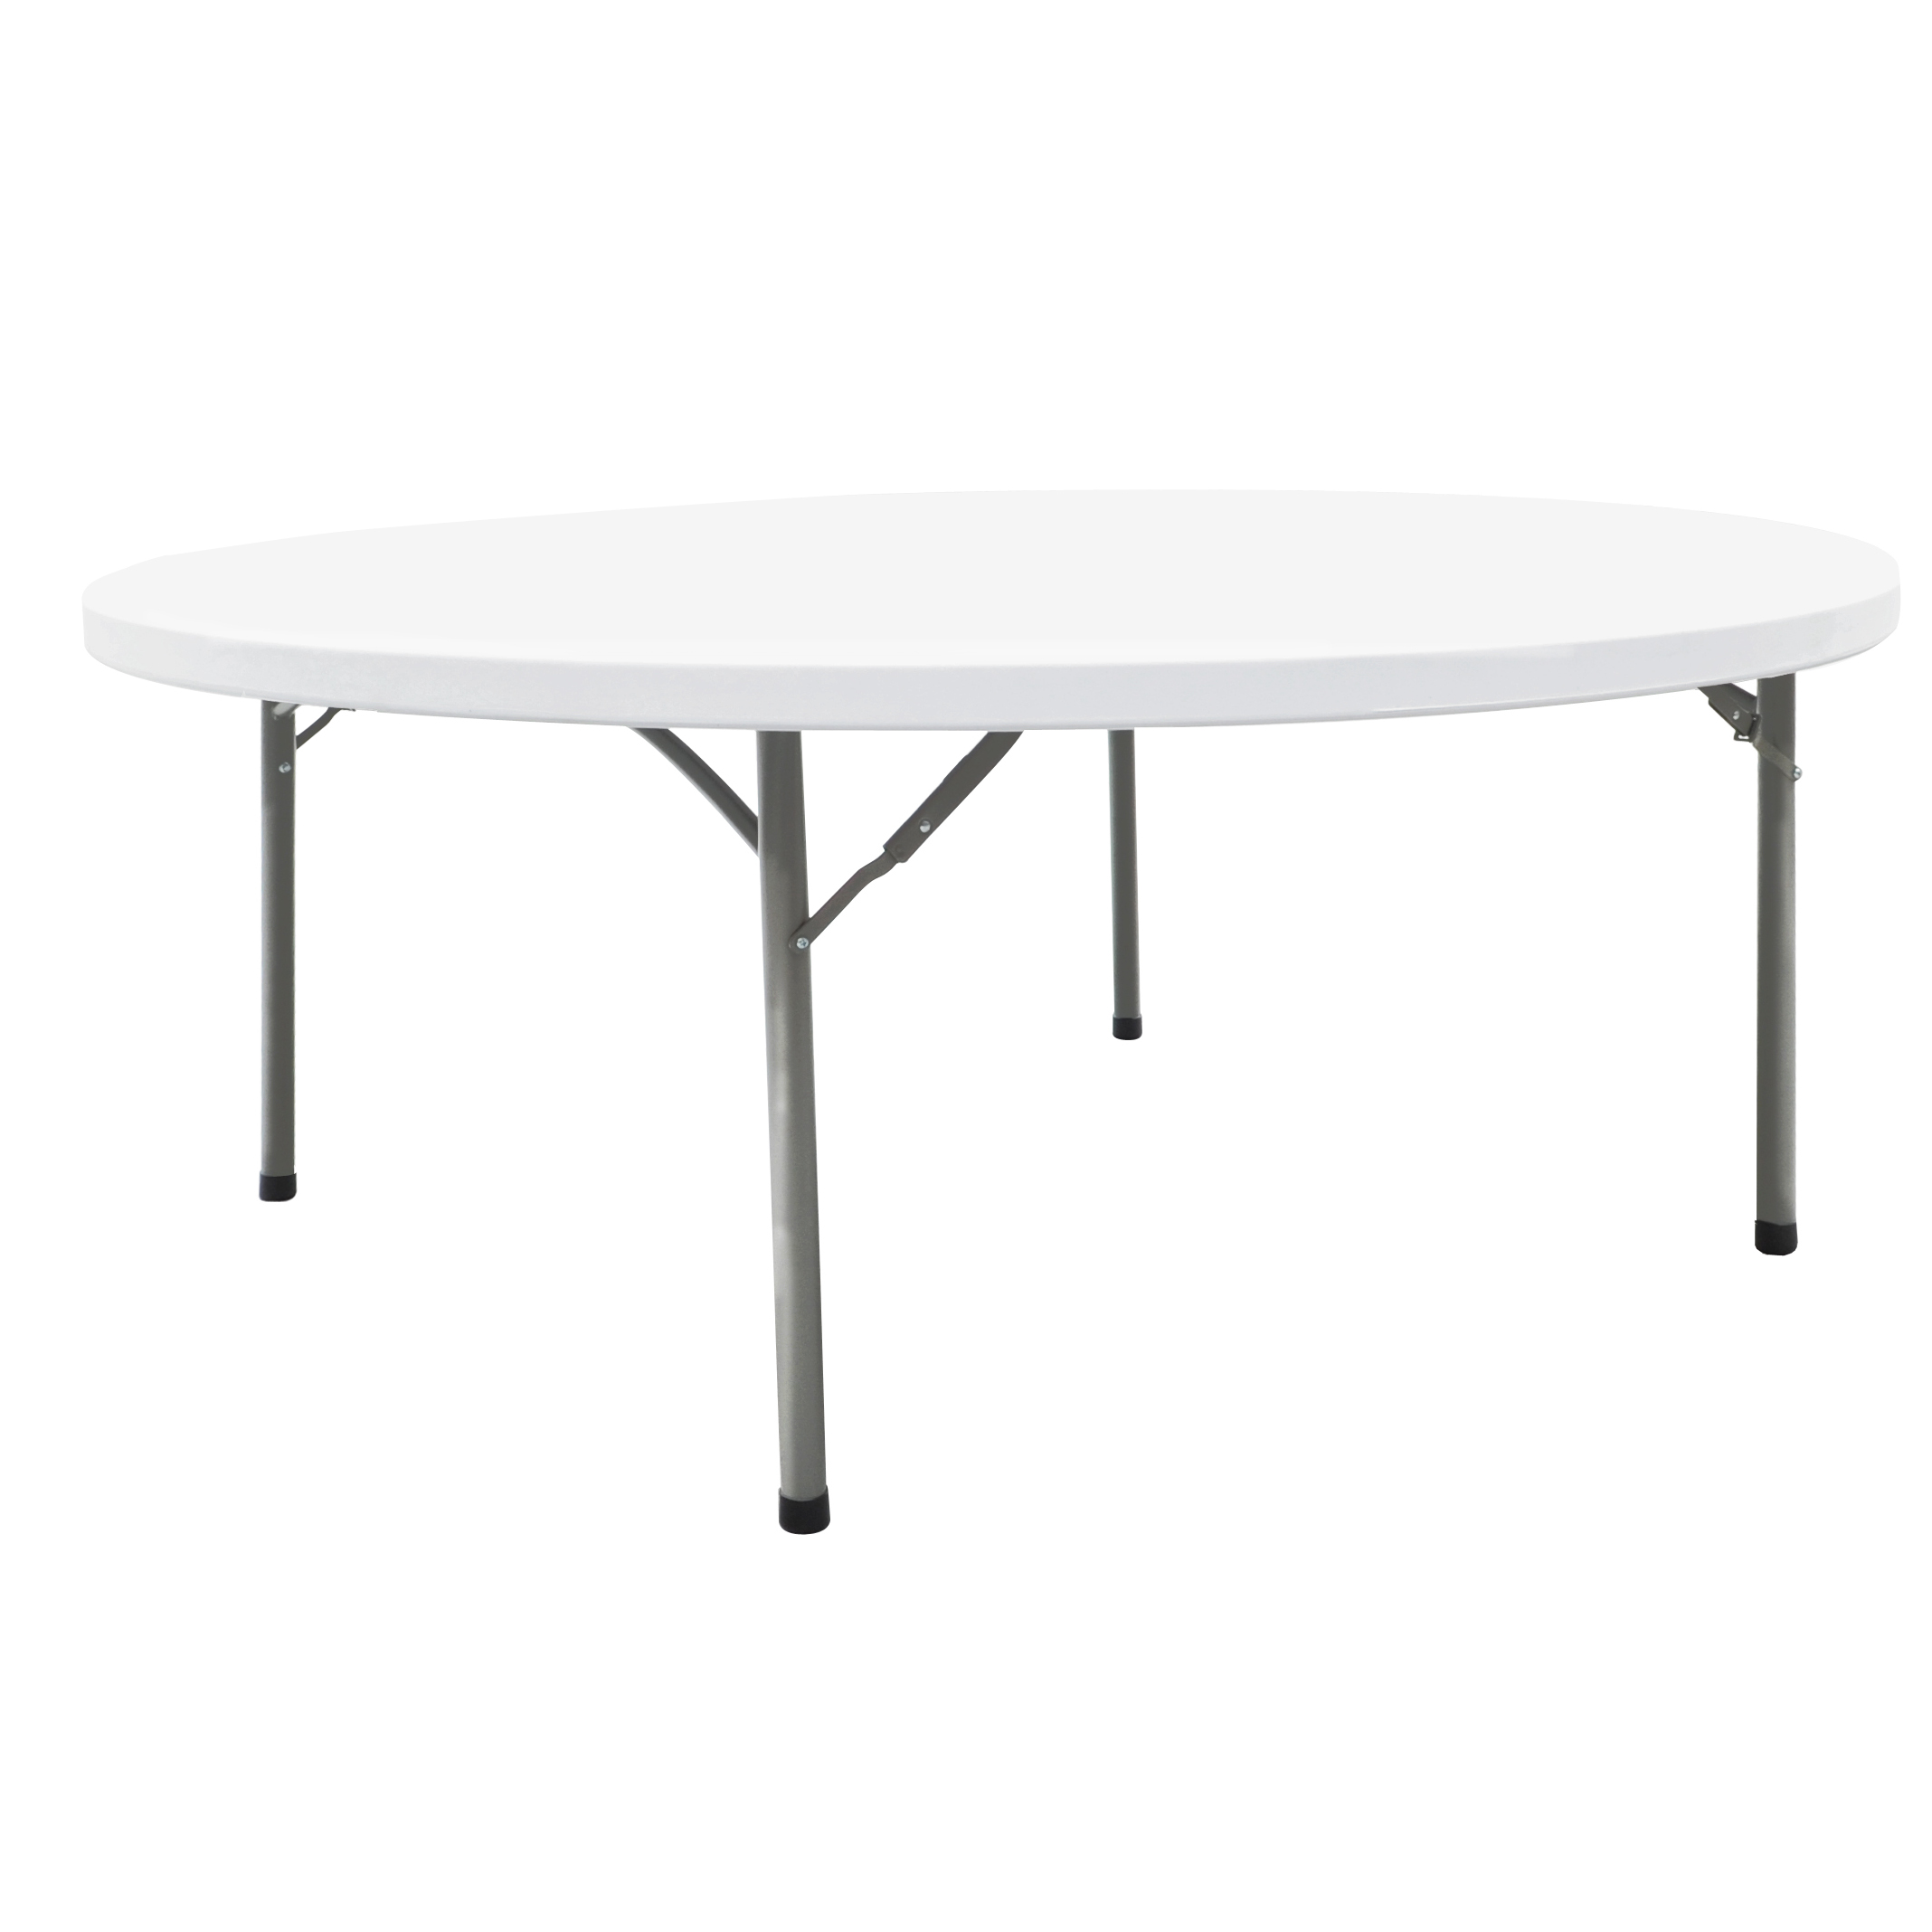 72-inch round folding table 